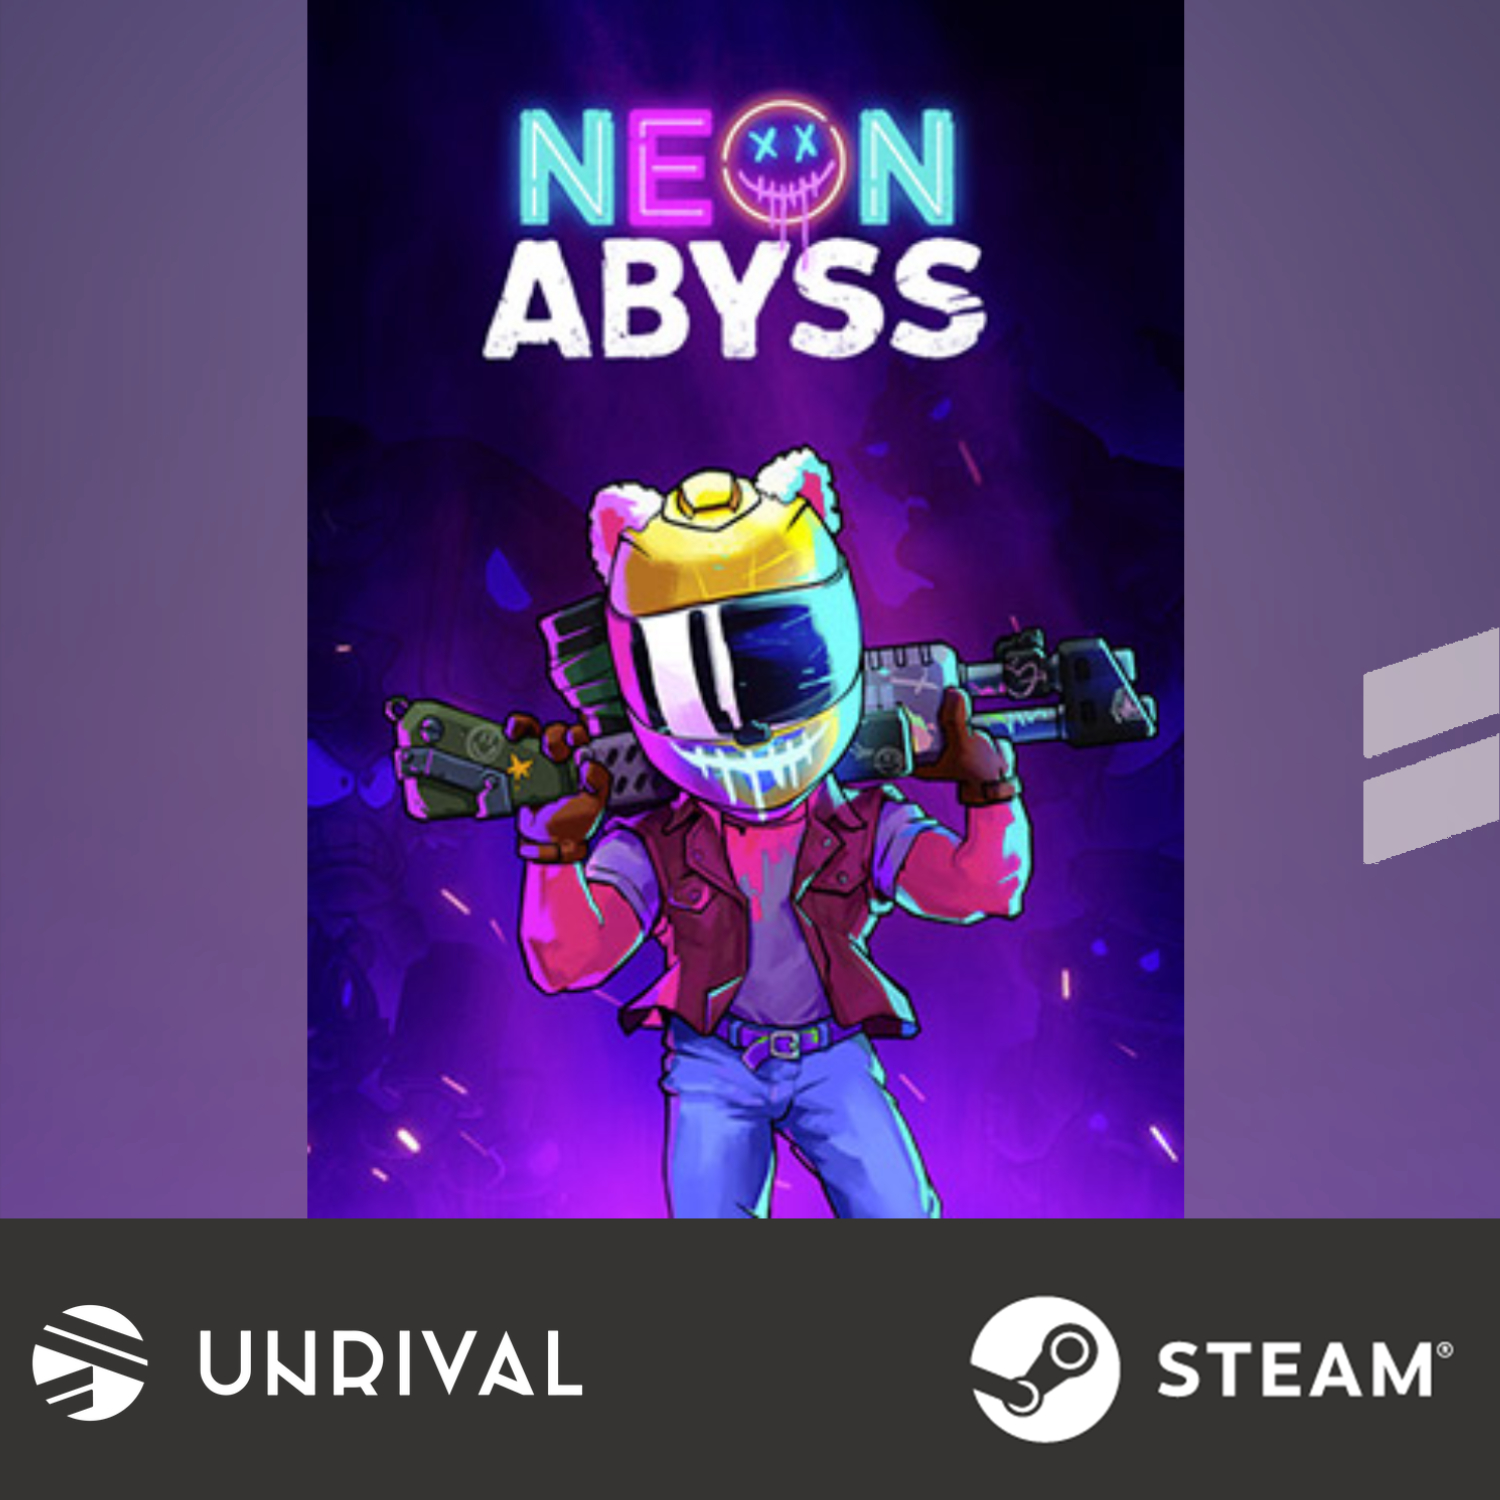 [Hot Sale] Neon Abyss - 1 Week PC Digital Download Game - Unrival